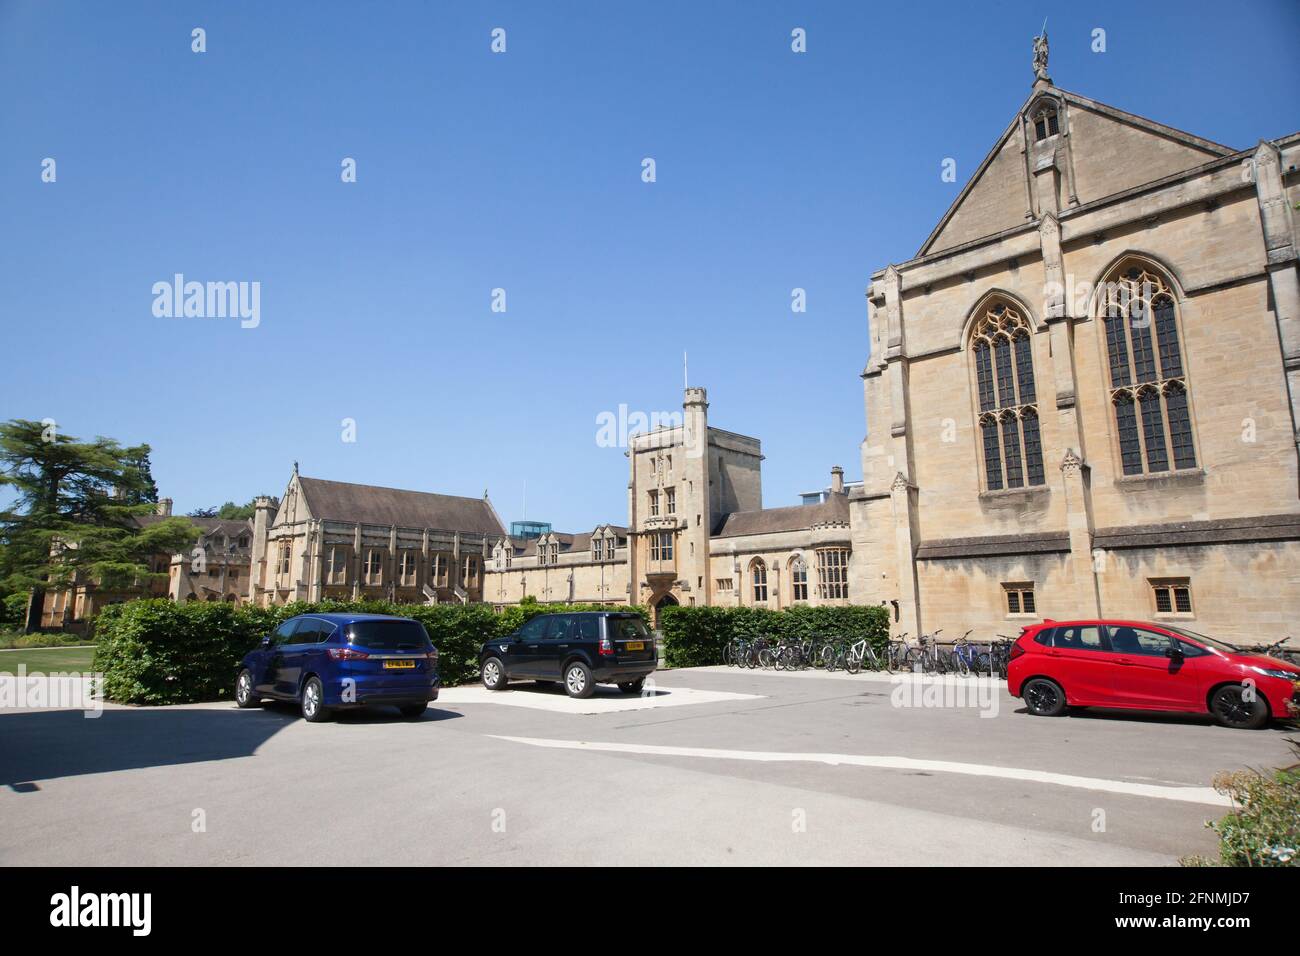 Mansfield College part of The University of Oxford in the UK, taken on the 25th June 2020 Stock Photo